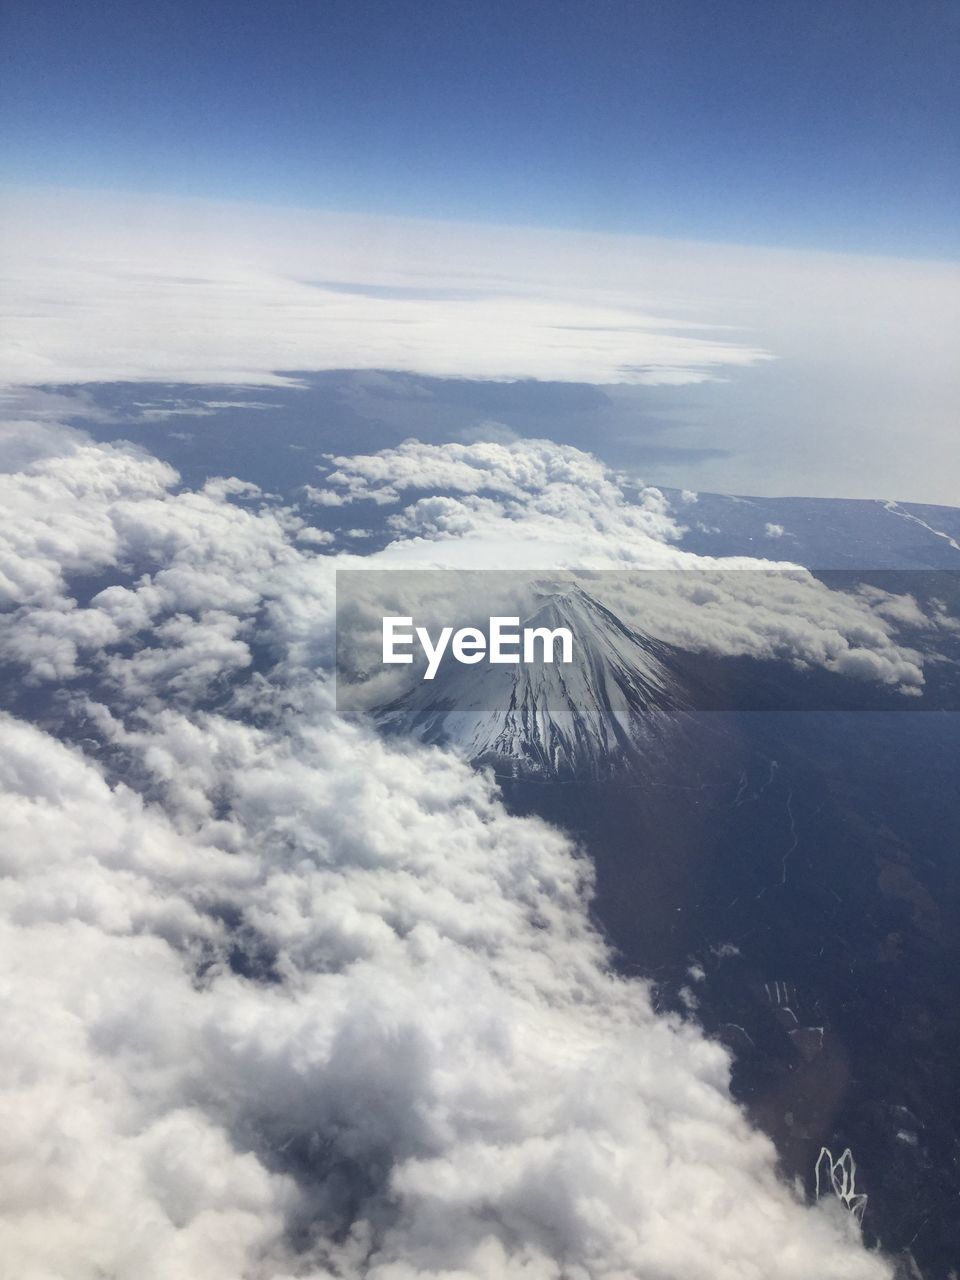 AERIAL VIEW OF MOUNTAINS AGAINST CLOUDY SKY